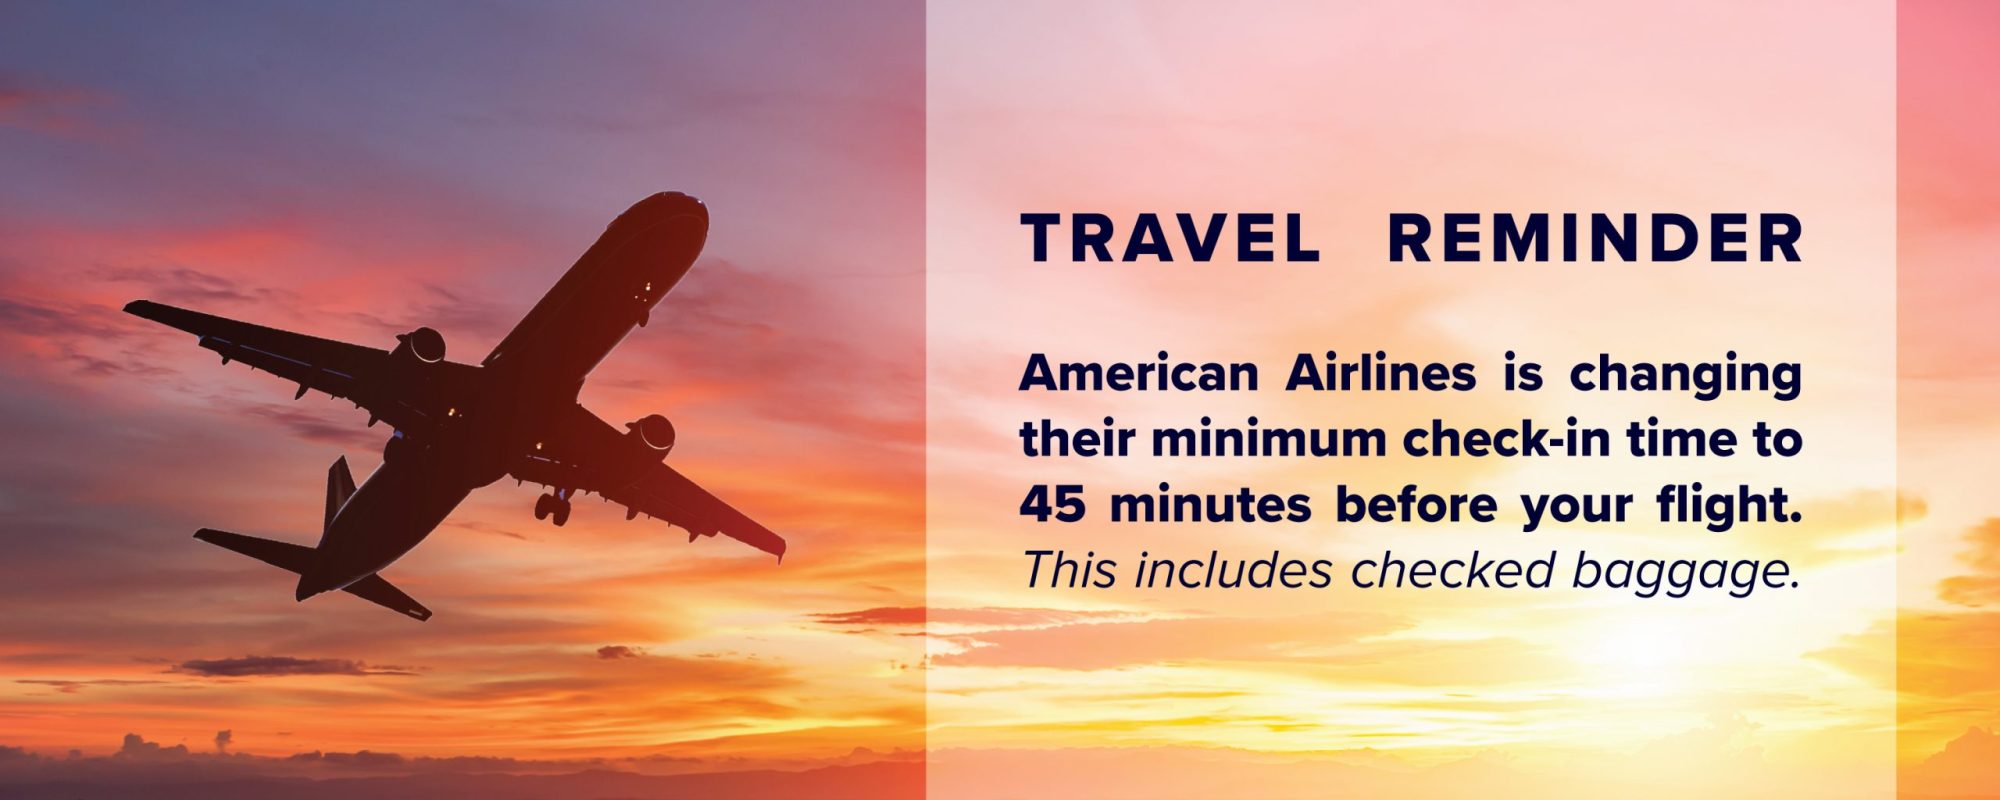 American Airlines Minimum Check-in Time: 45 minutes